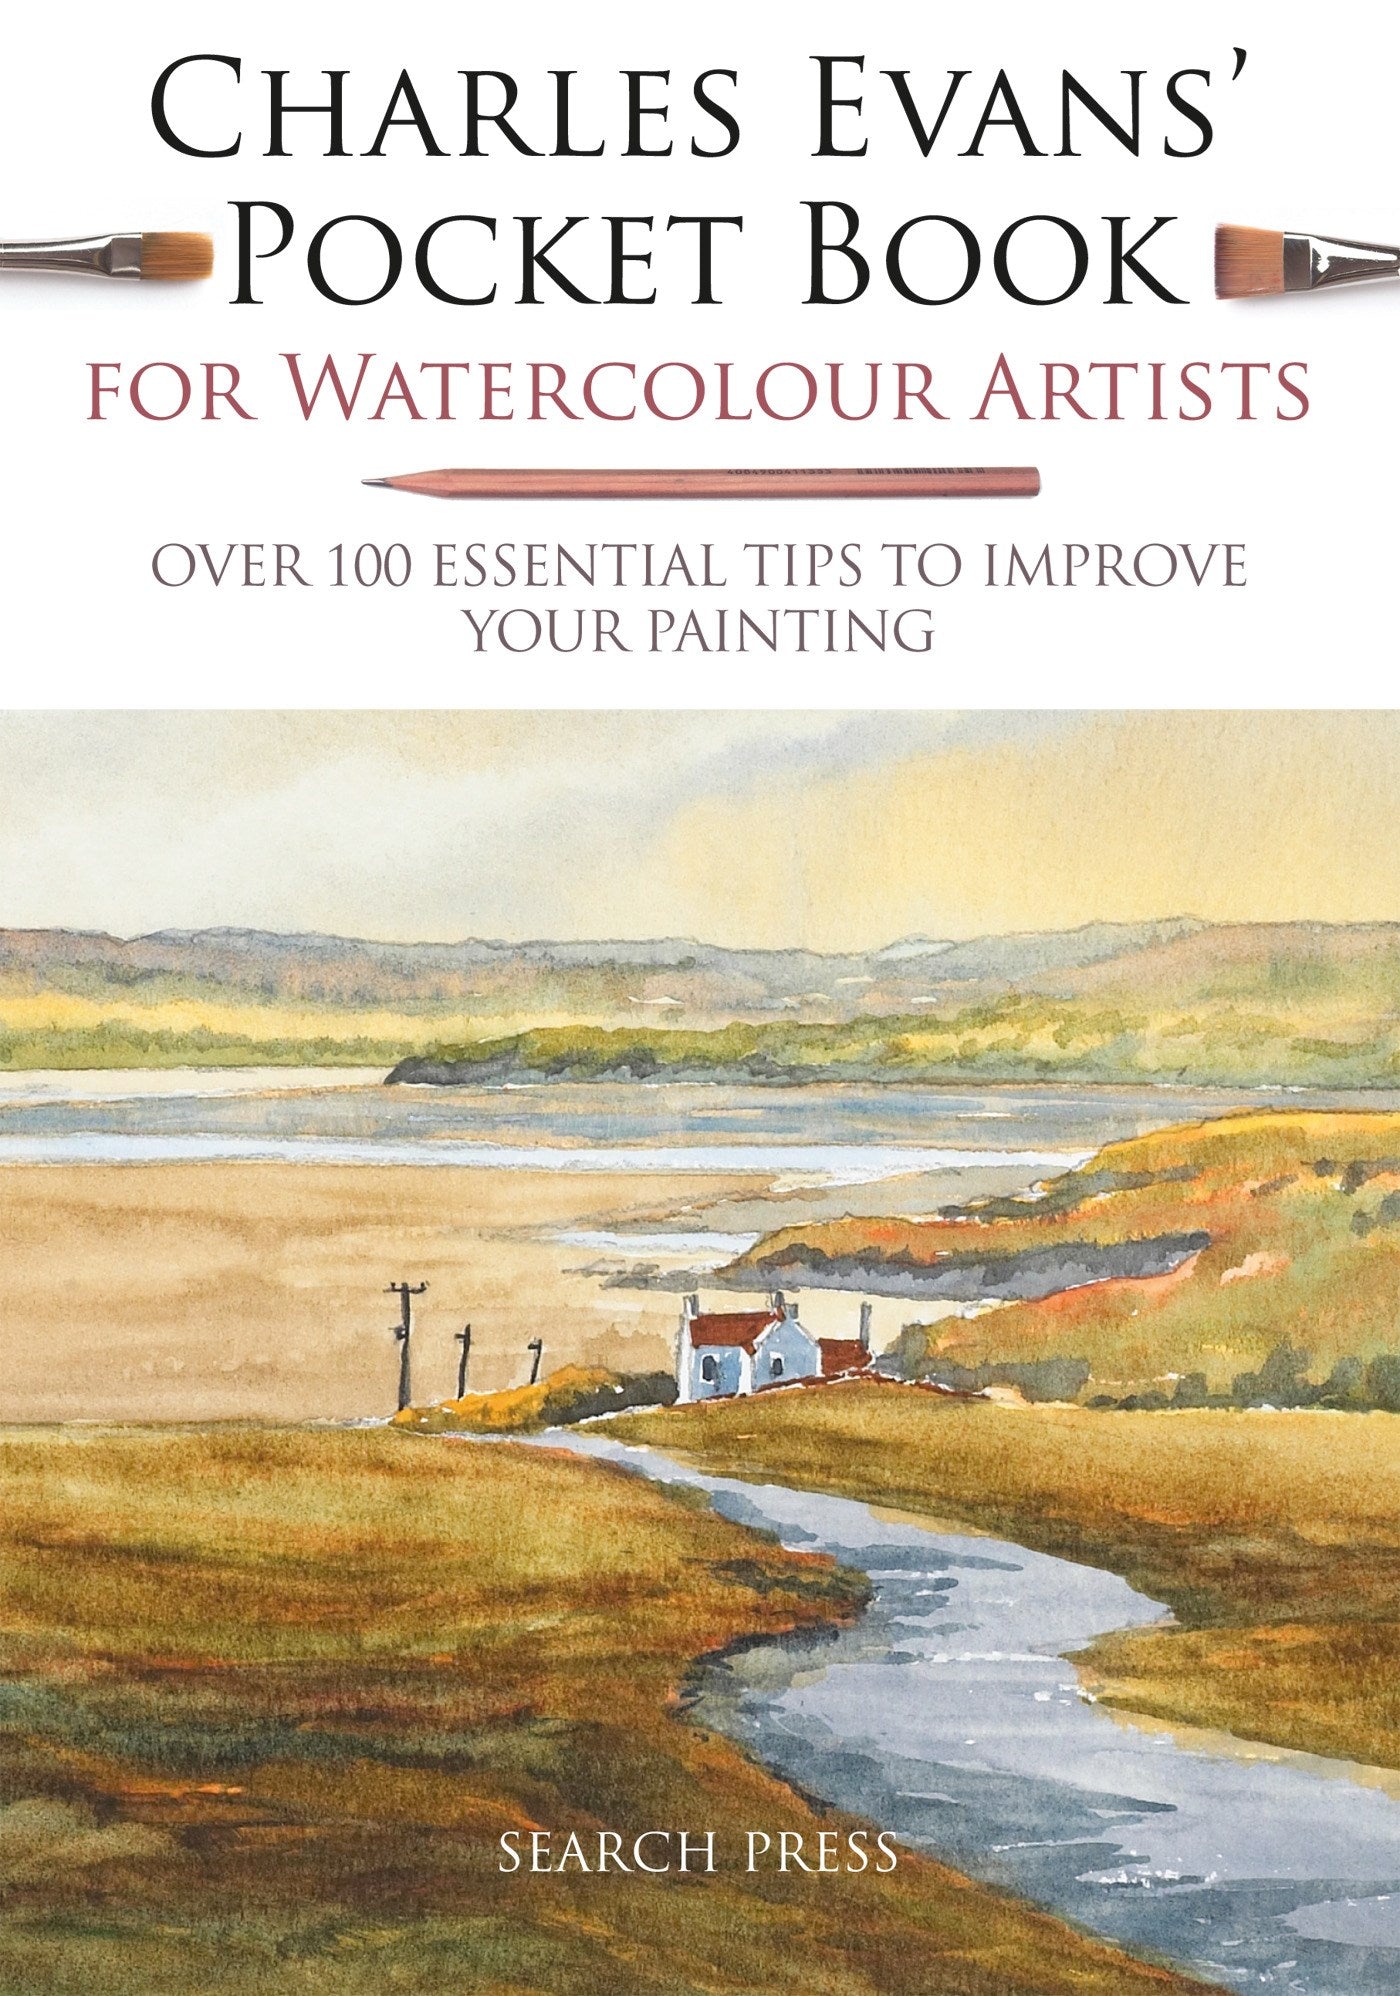 Charles Evans' Pocket Book for Watercolour Artists: Over 100 Essential Tips to Improve Your Painting